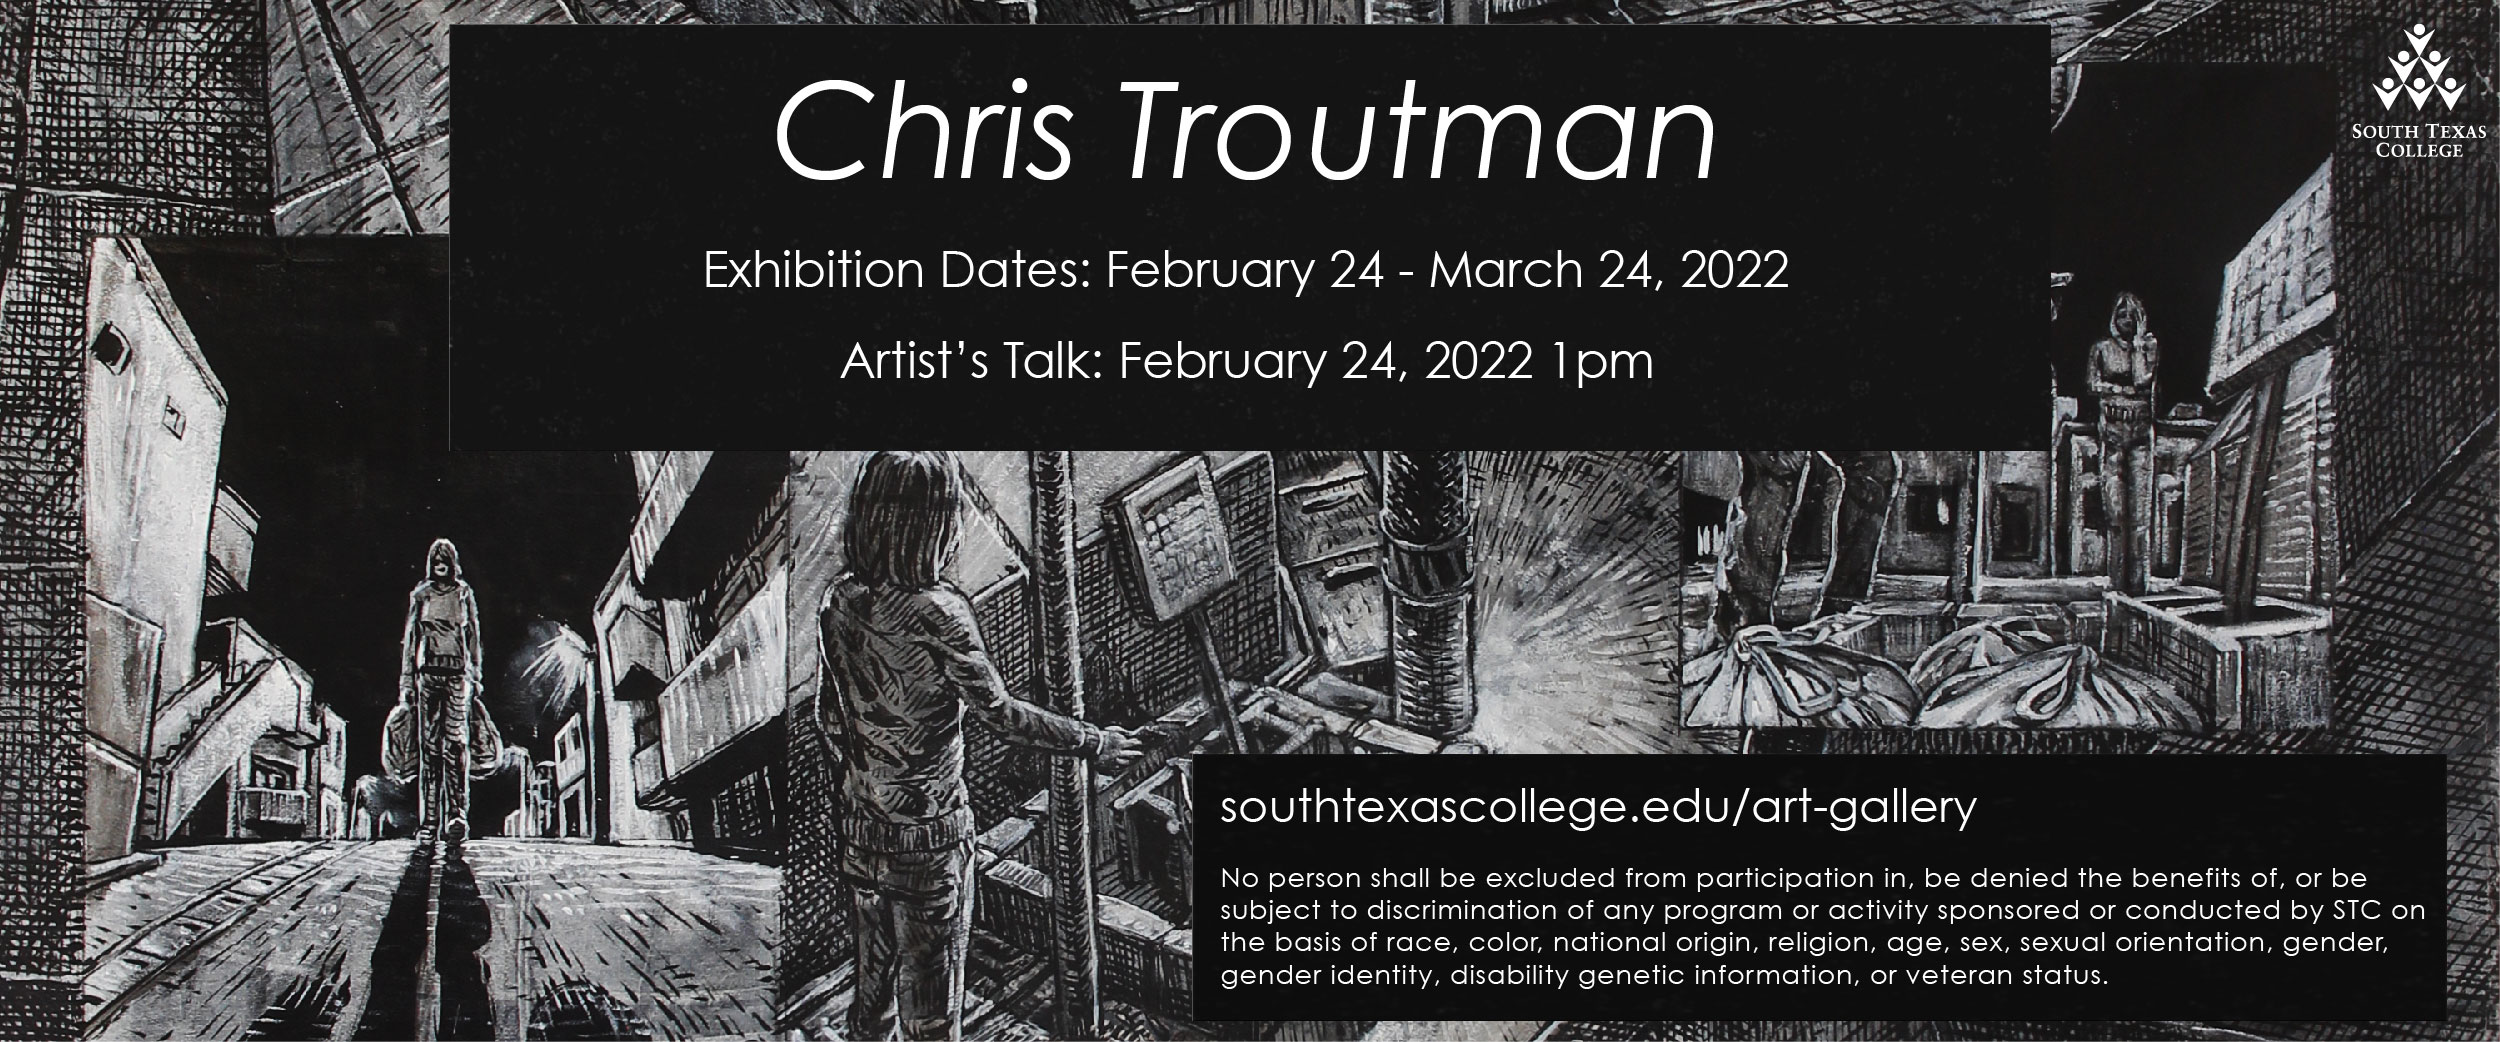 Chris Troutman: Sequential